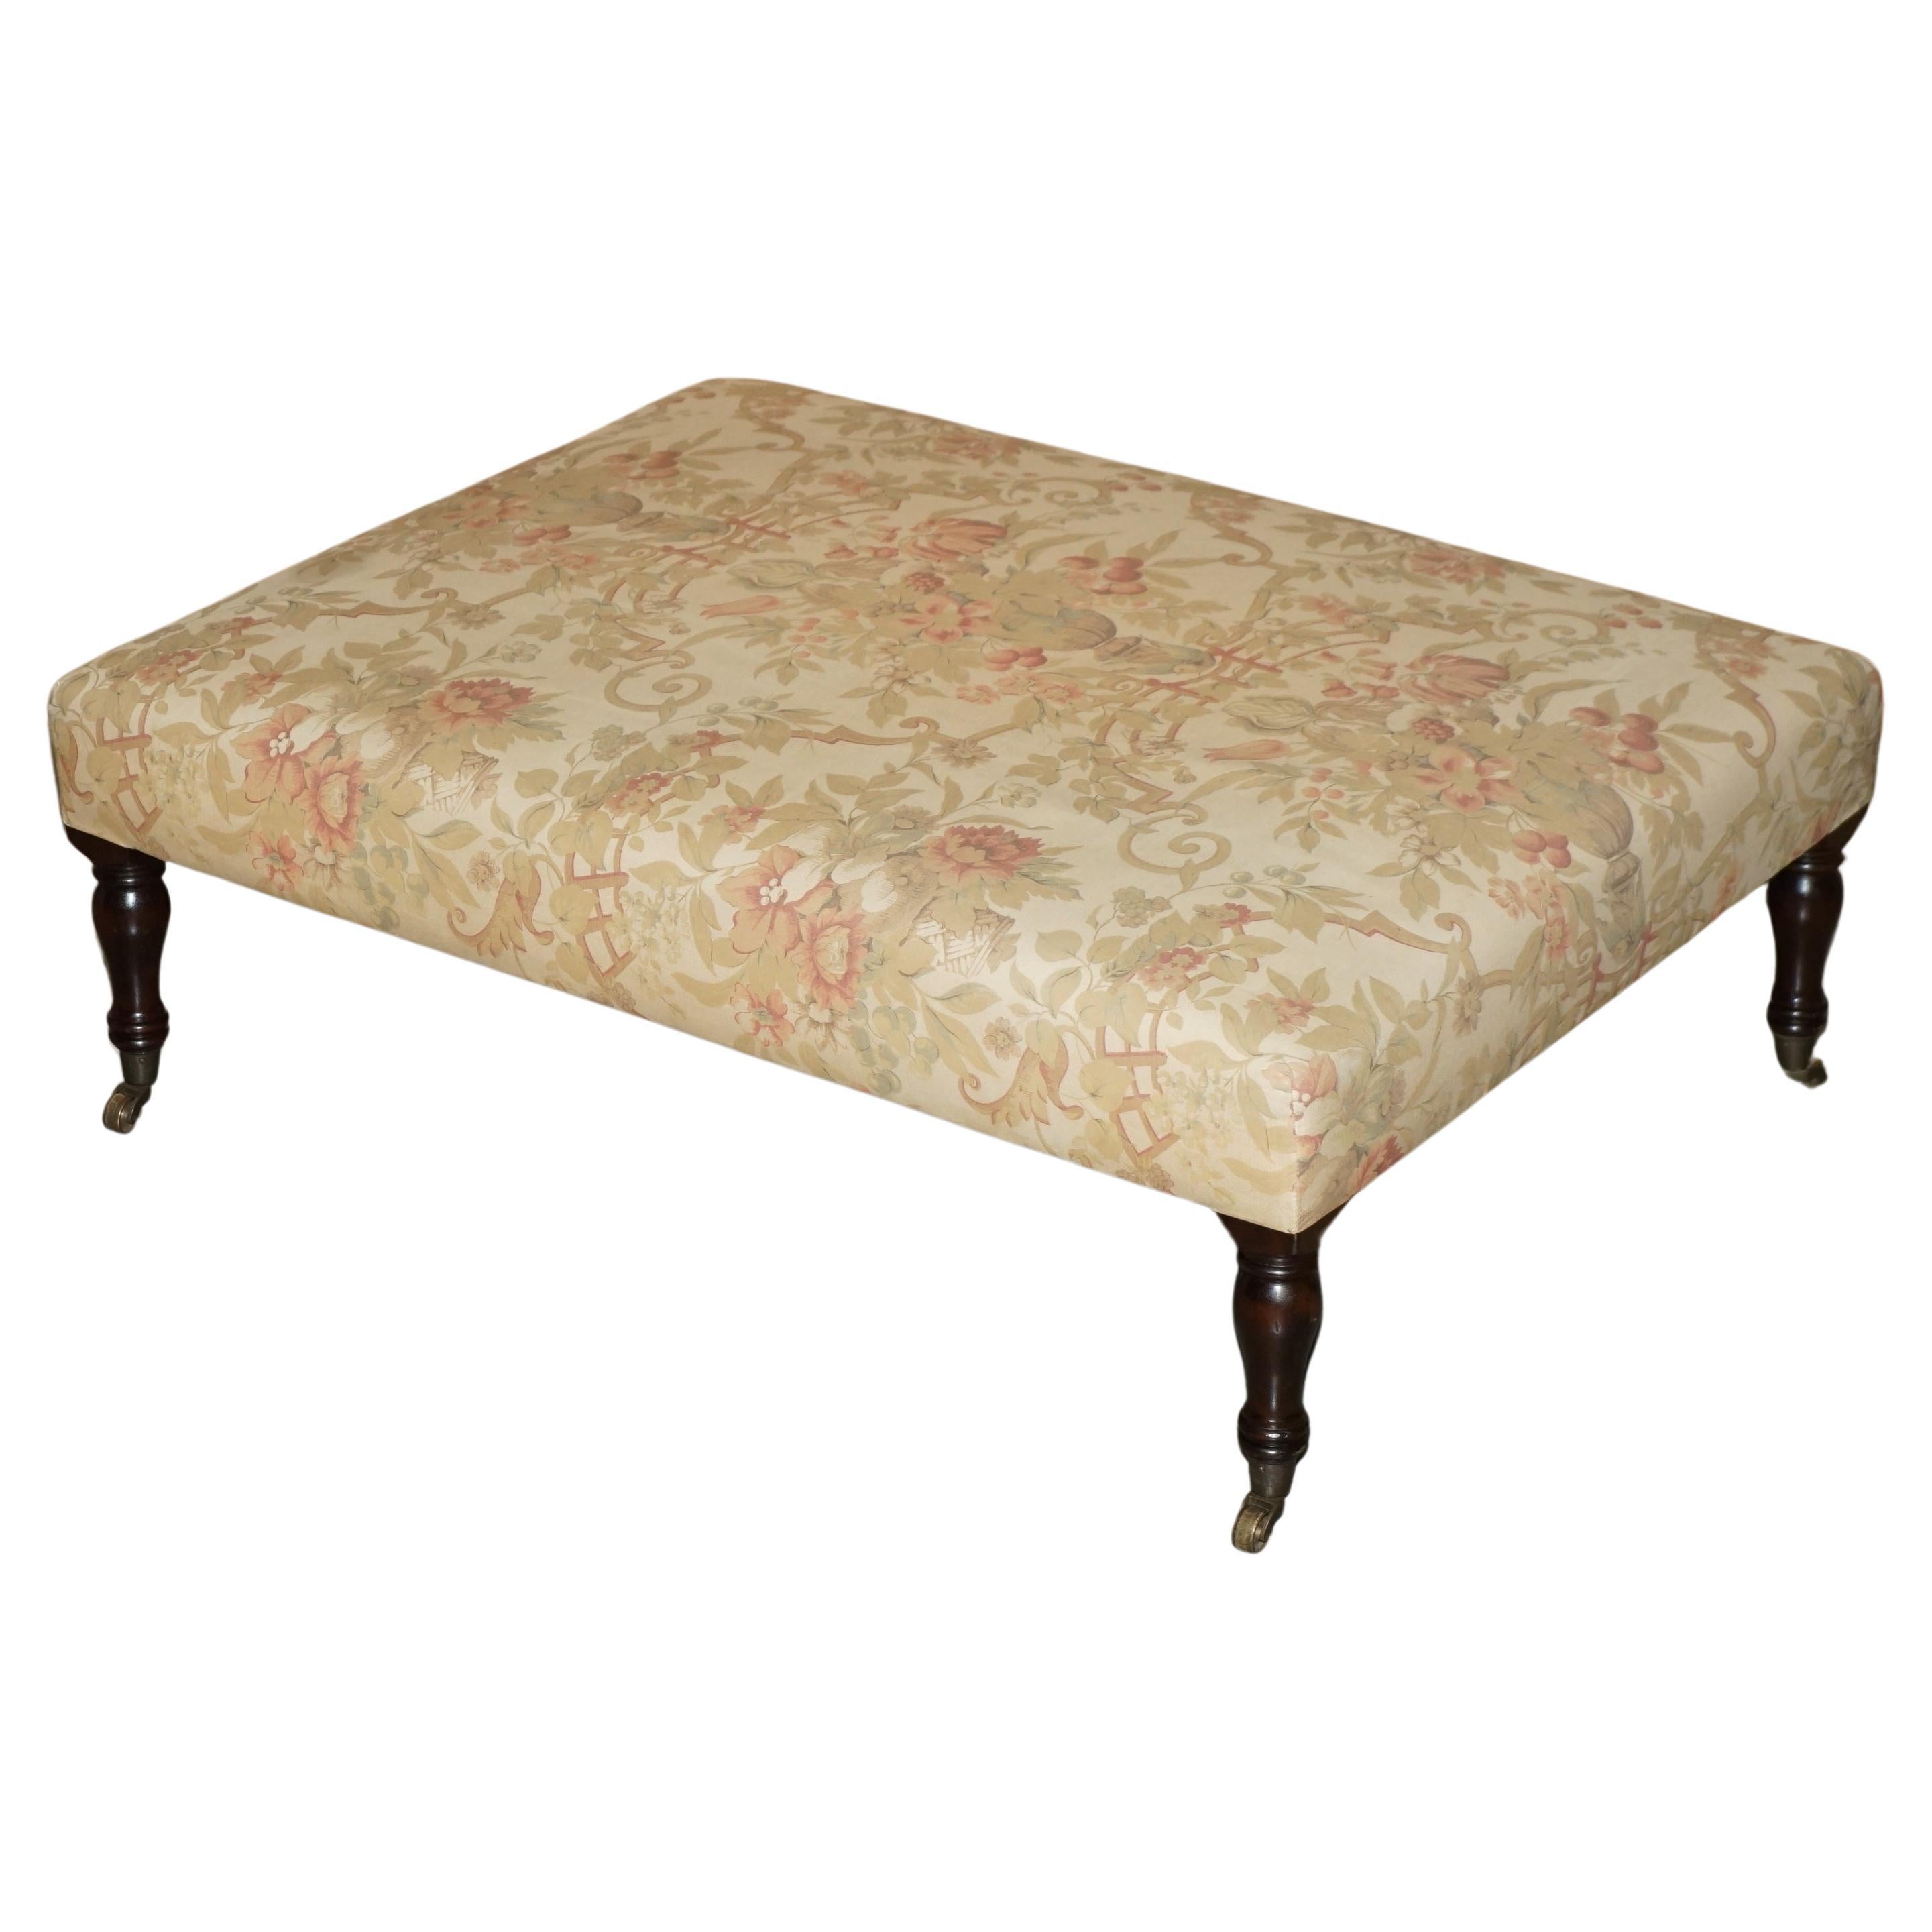 Ottoman de collection très grand format GEORGE SMITH CHELSEA FLORAL FOOTSTOOL